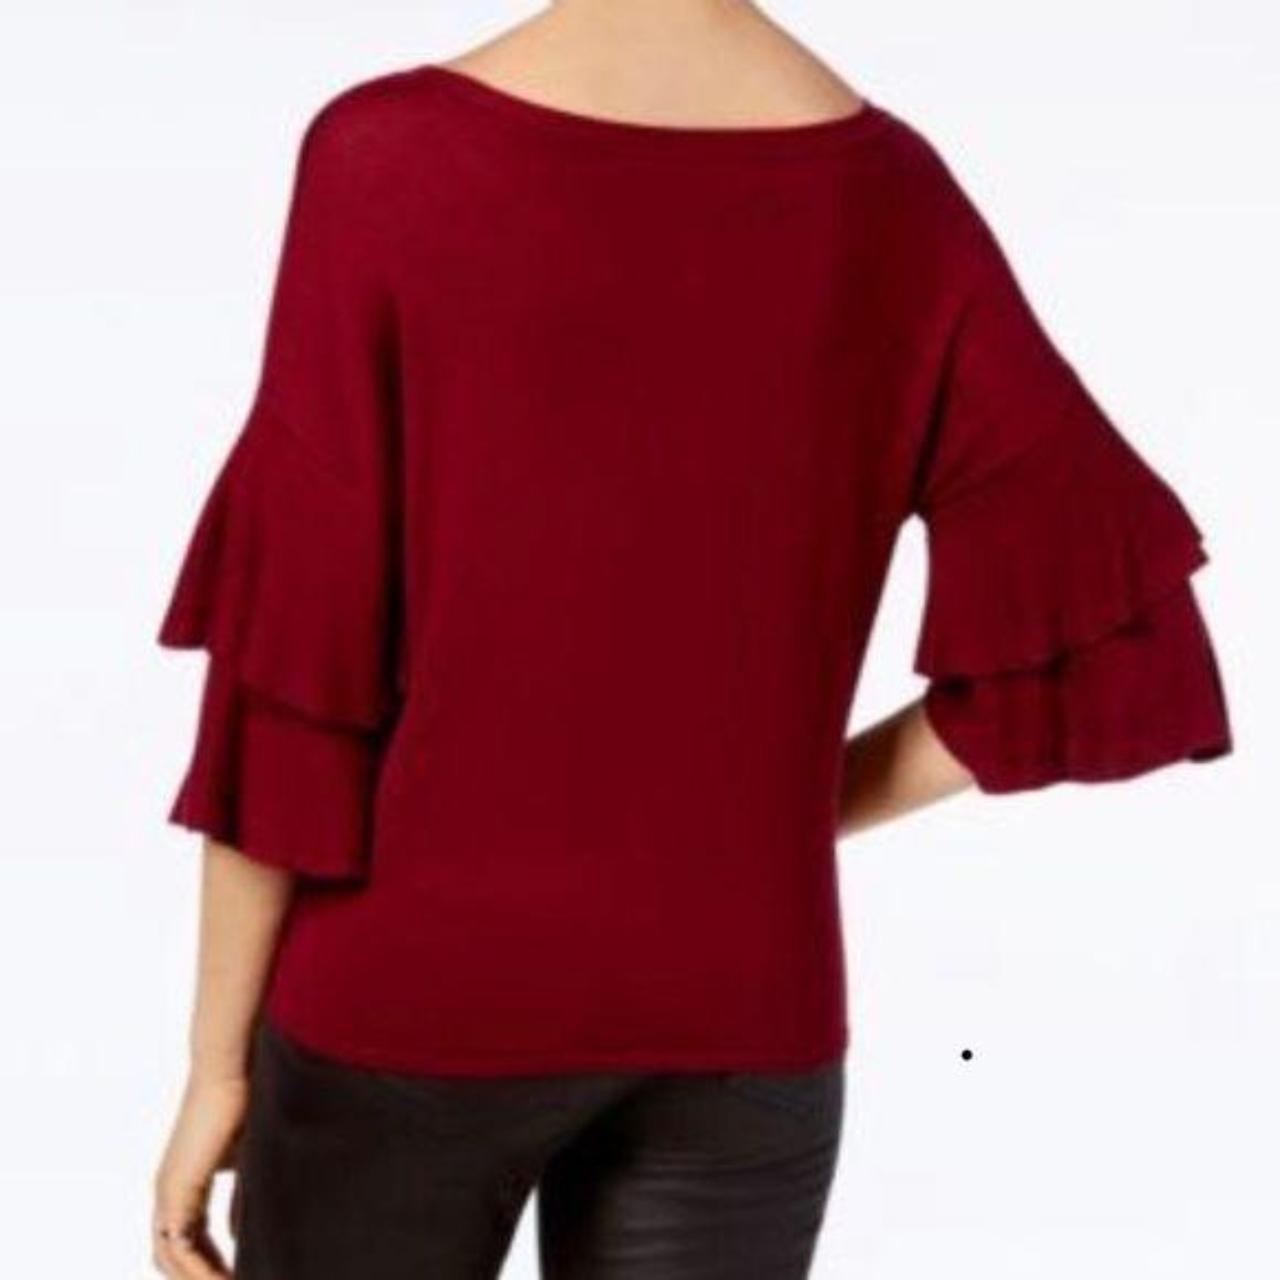 Hooked Up by IOT Women's Red and Burgundy Shirt (2)